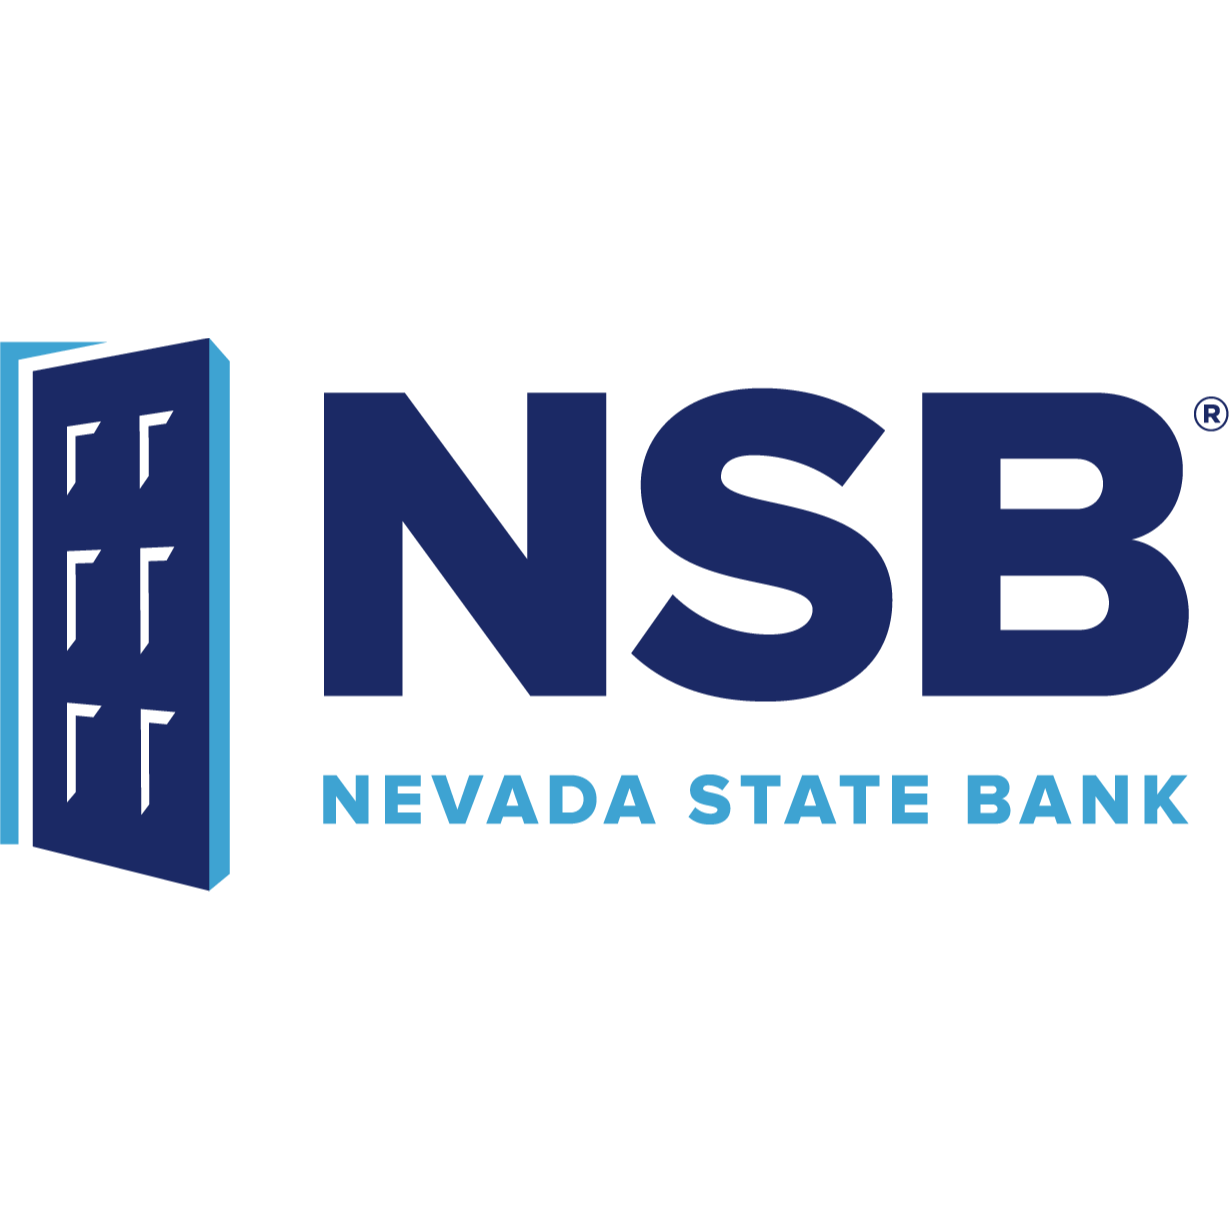 Nevada State Bank | West Wendover Branch - West Wendover, NV 89883 - (775)393-2335 | ShowMeLocal.com